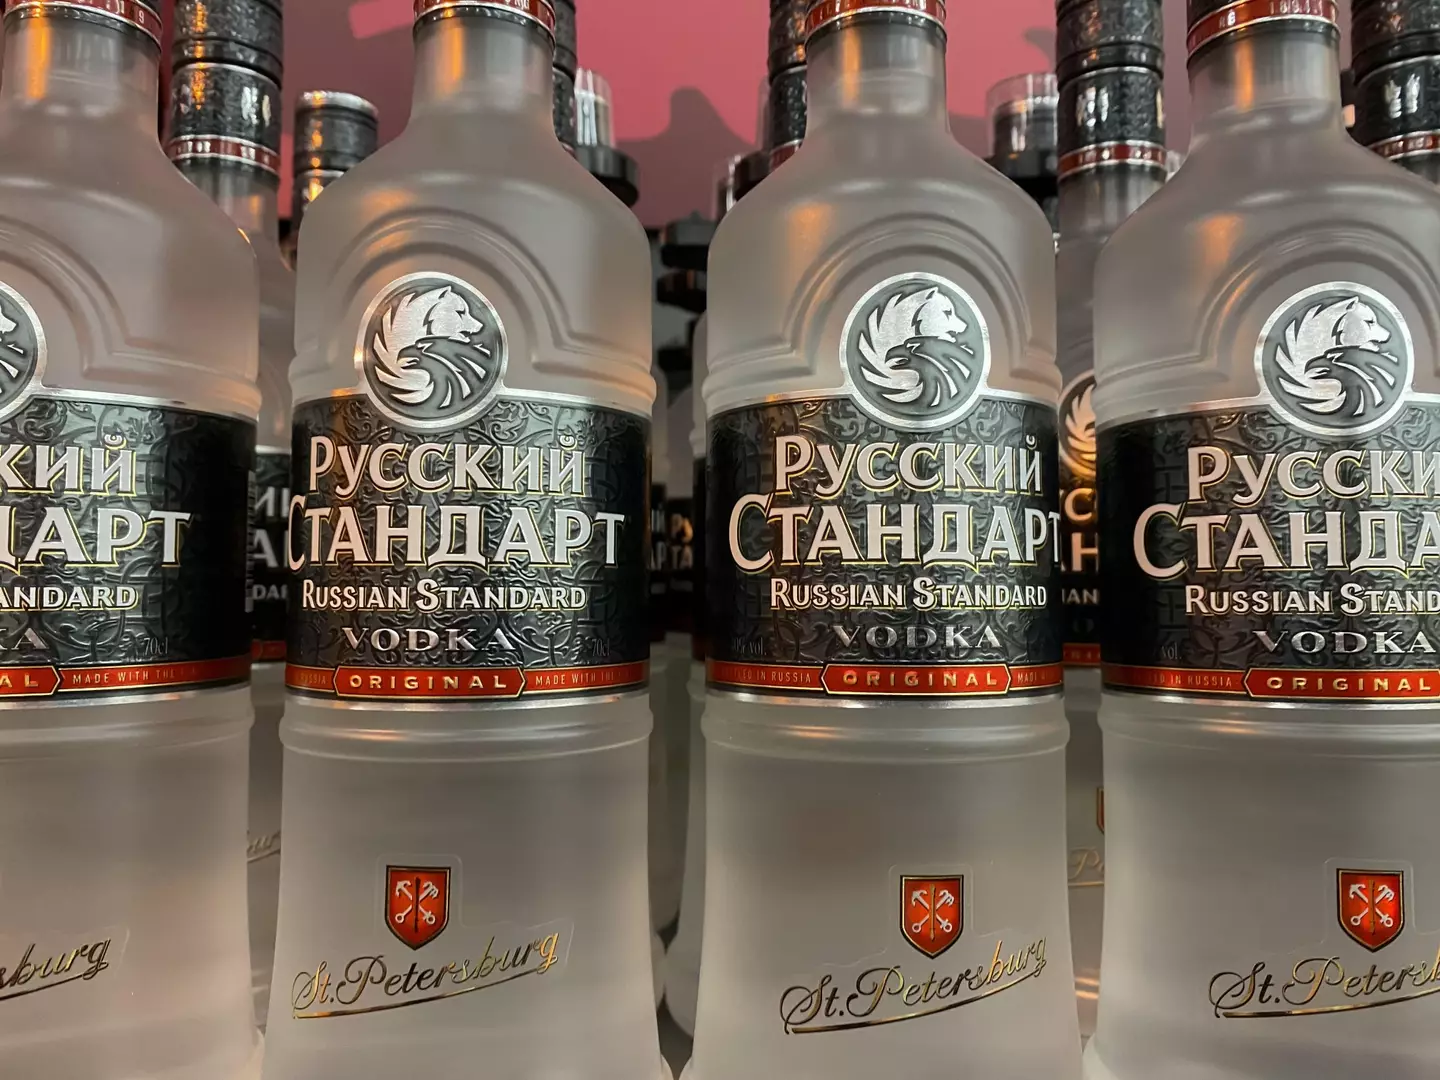 Russian Standard vodka has been removed from many supermarkets in the UK.